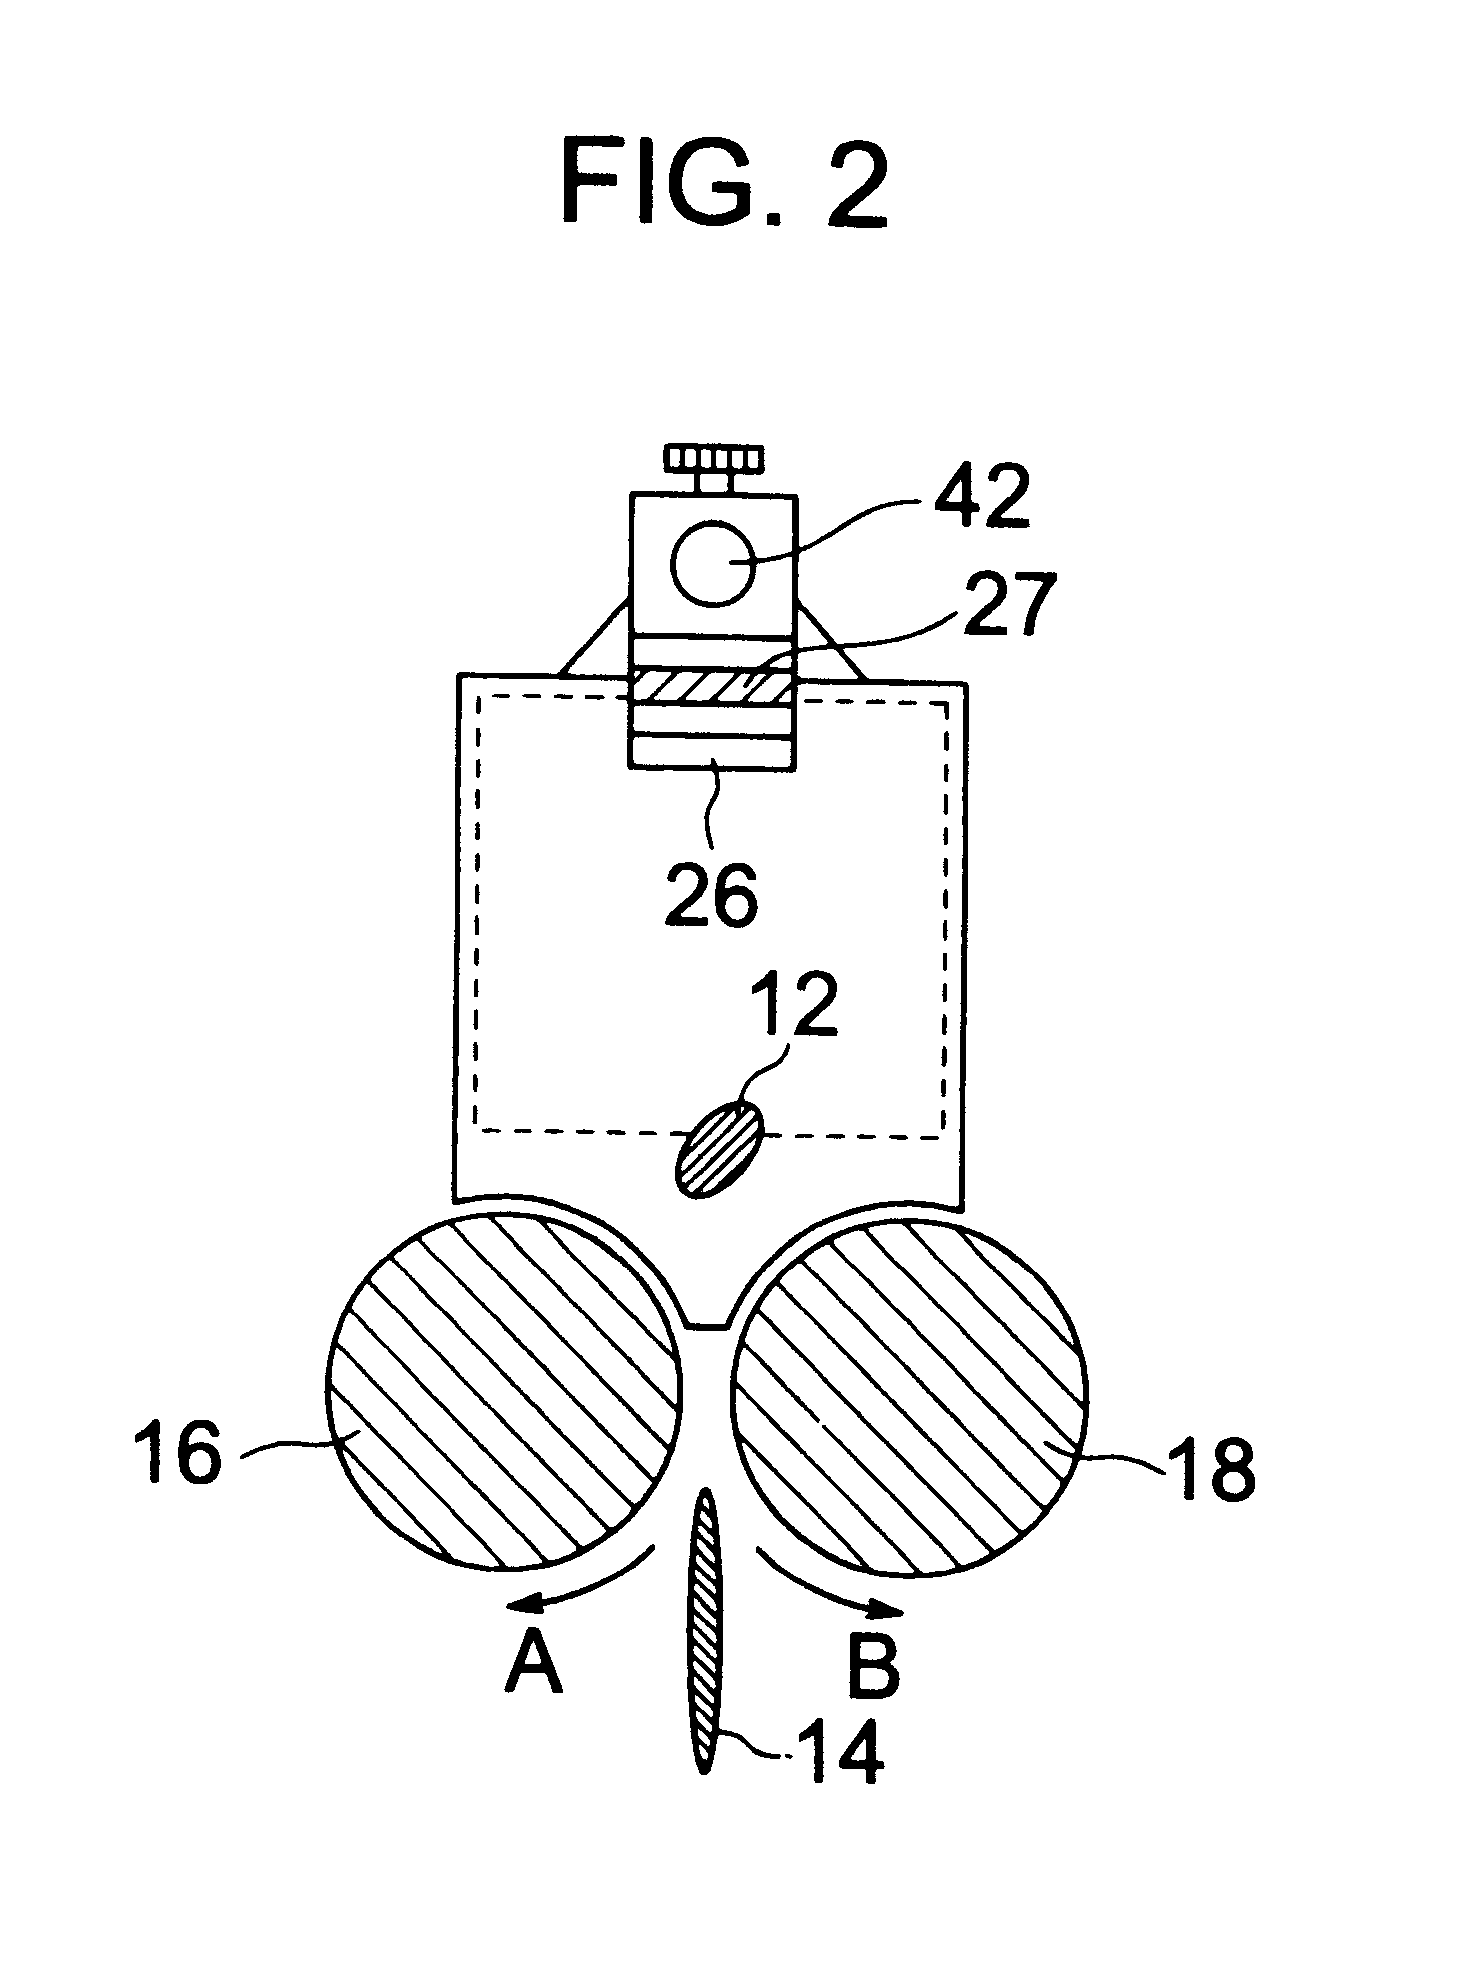 Sensor apparatus and safety apparatus for protecting approach to machines